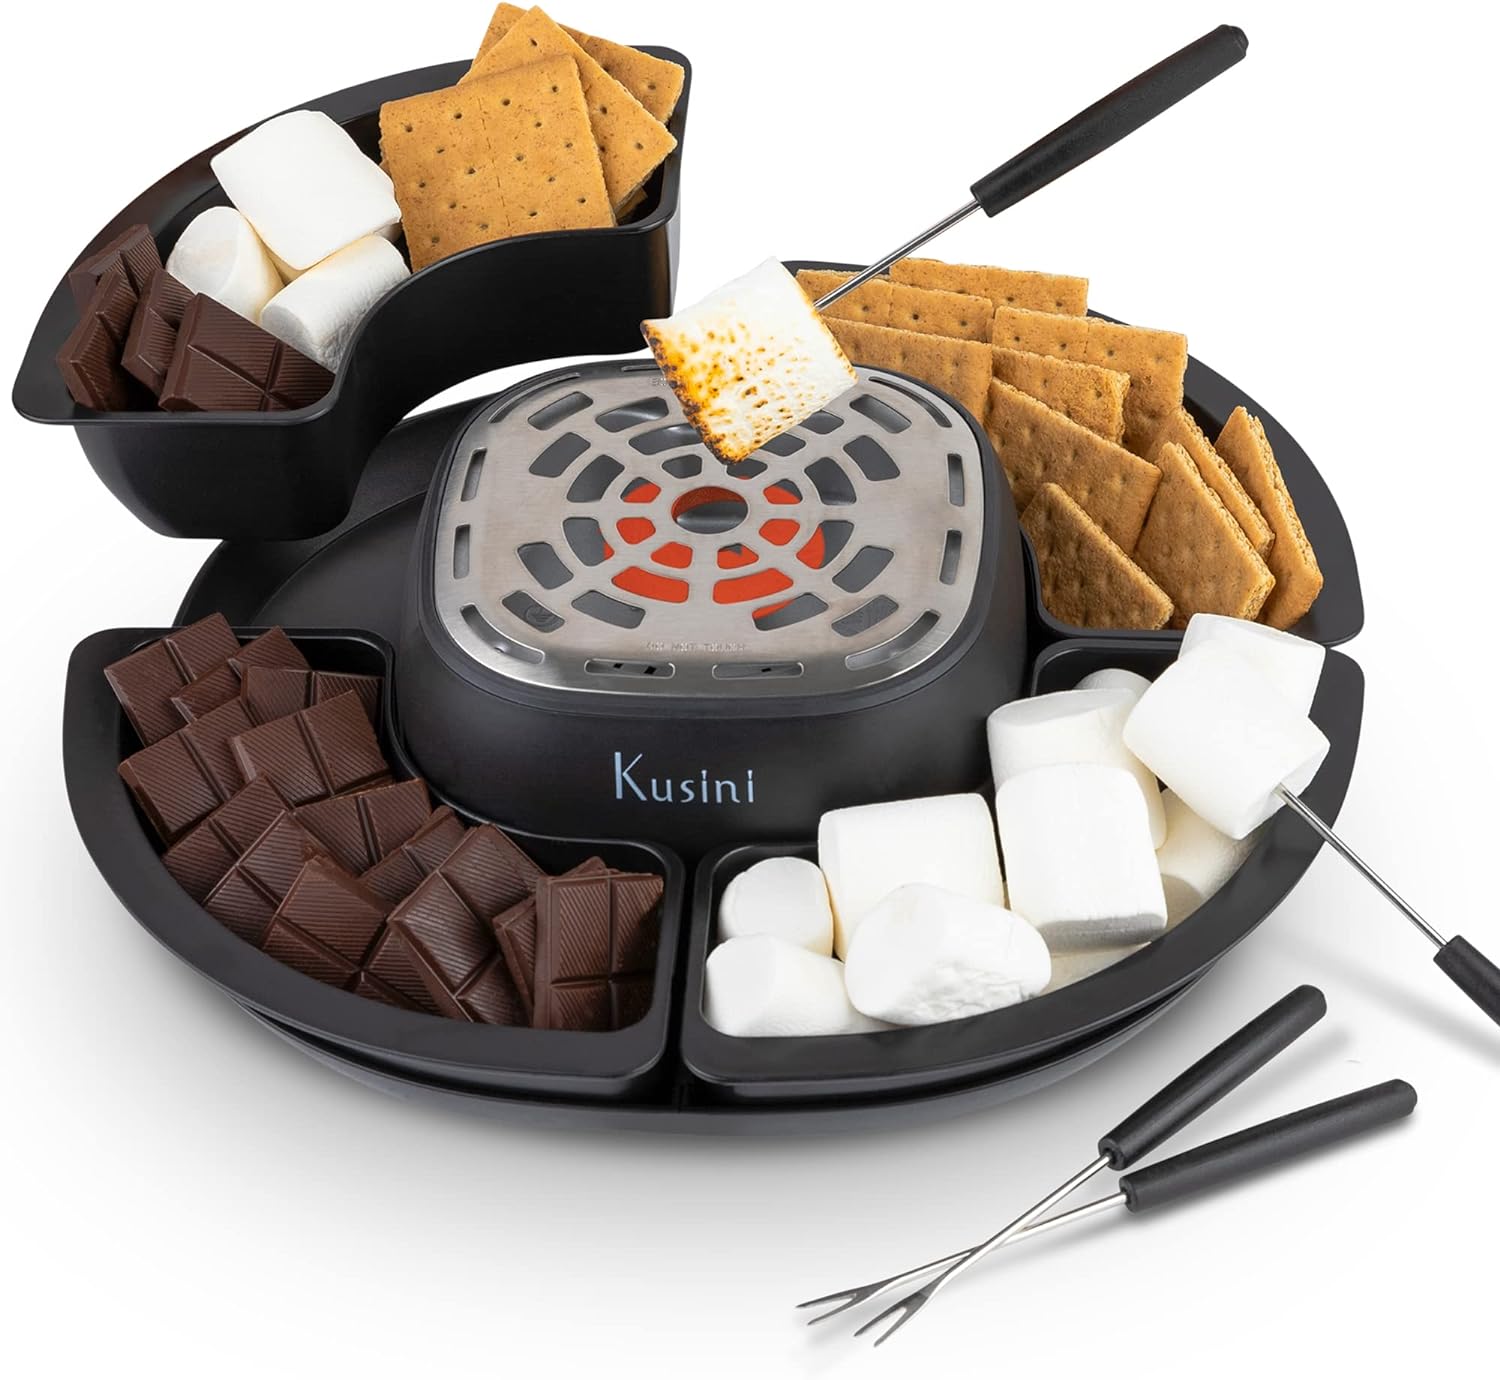 Smores Maker Tabletop Indoor – Flameless Electric Marshmallow Roaster – 4 Detachable Trays & 4 Roasting Forks – Gift Set & Date Night Idea. Movie Night Supplies & Housewarming Gift